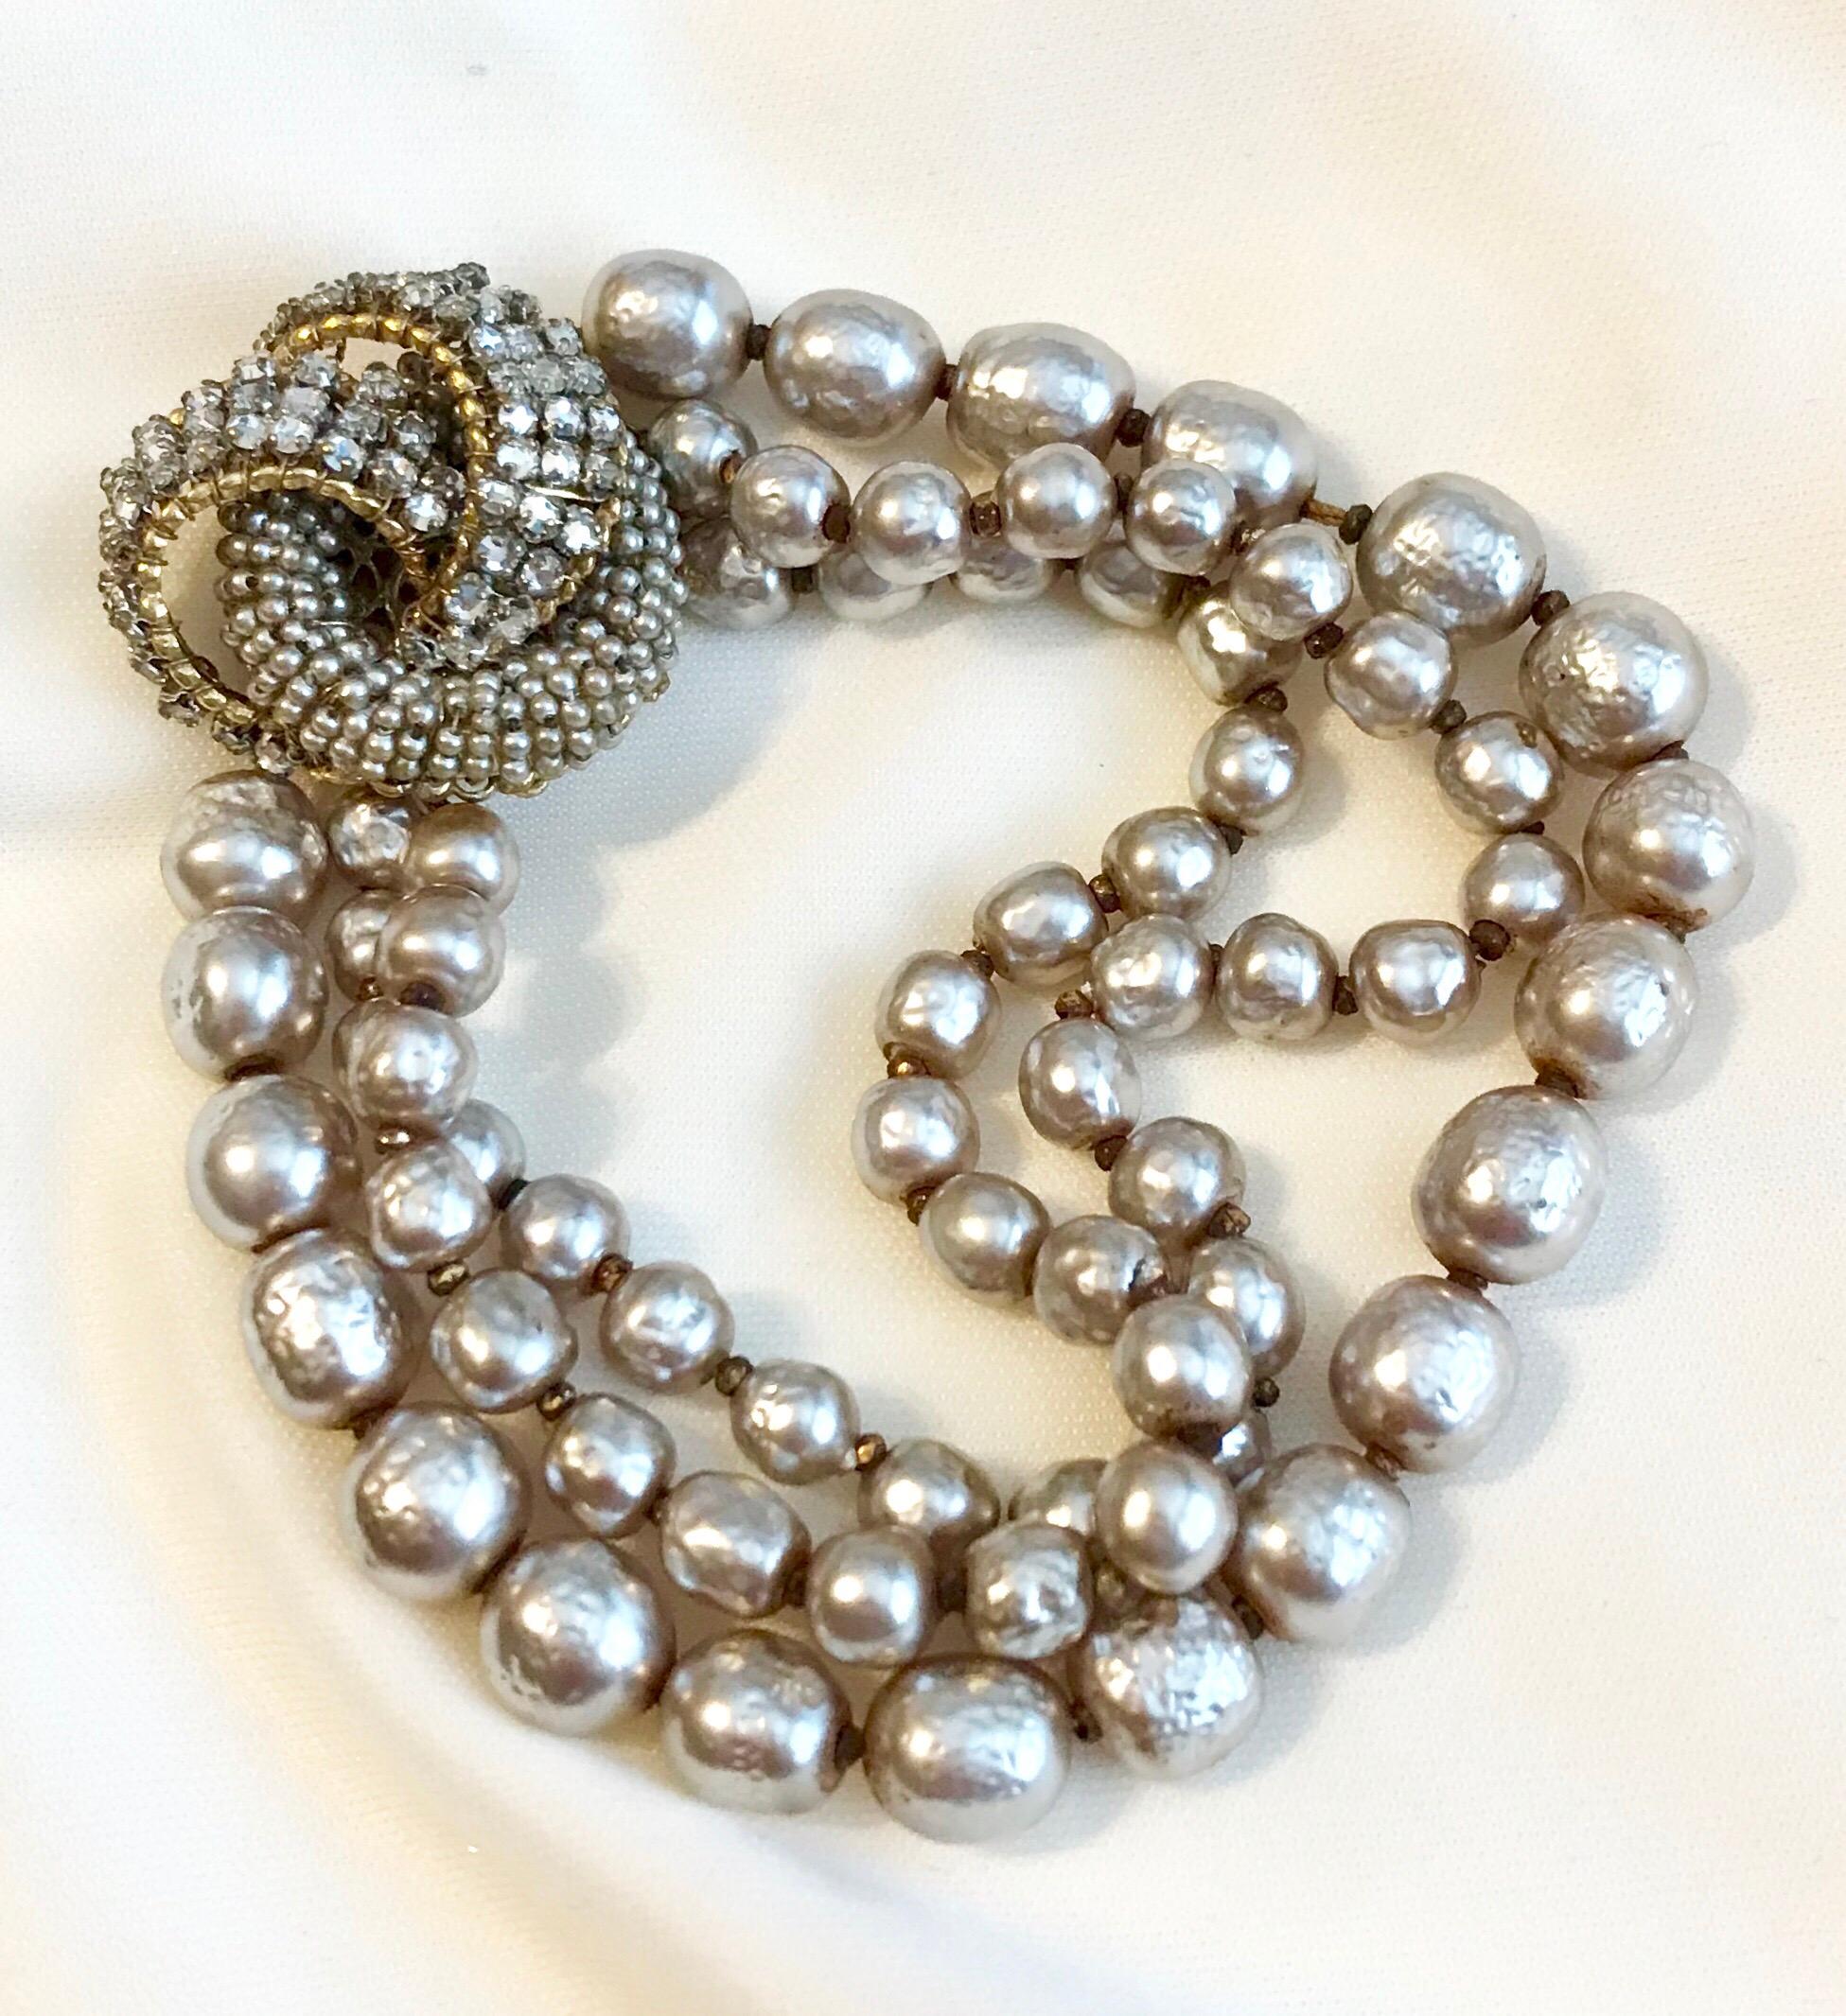 Circa 1950s Miriam Haskell triple strand, soft-white baroque faux-pearl bracelet with an ornate jeweled clasp.  The clasp is covered with prong set rhinestones and faux-seed pearls and marked on the back, Miriam Haskell.  This piece is from the